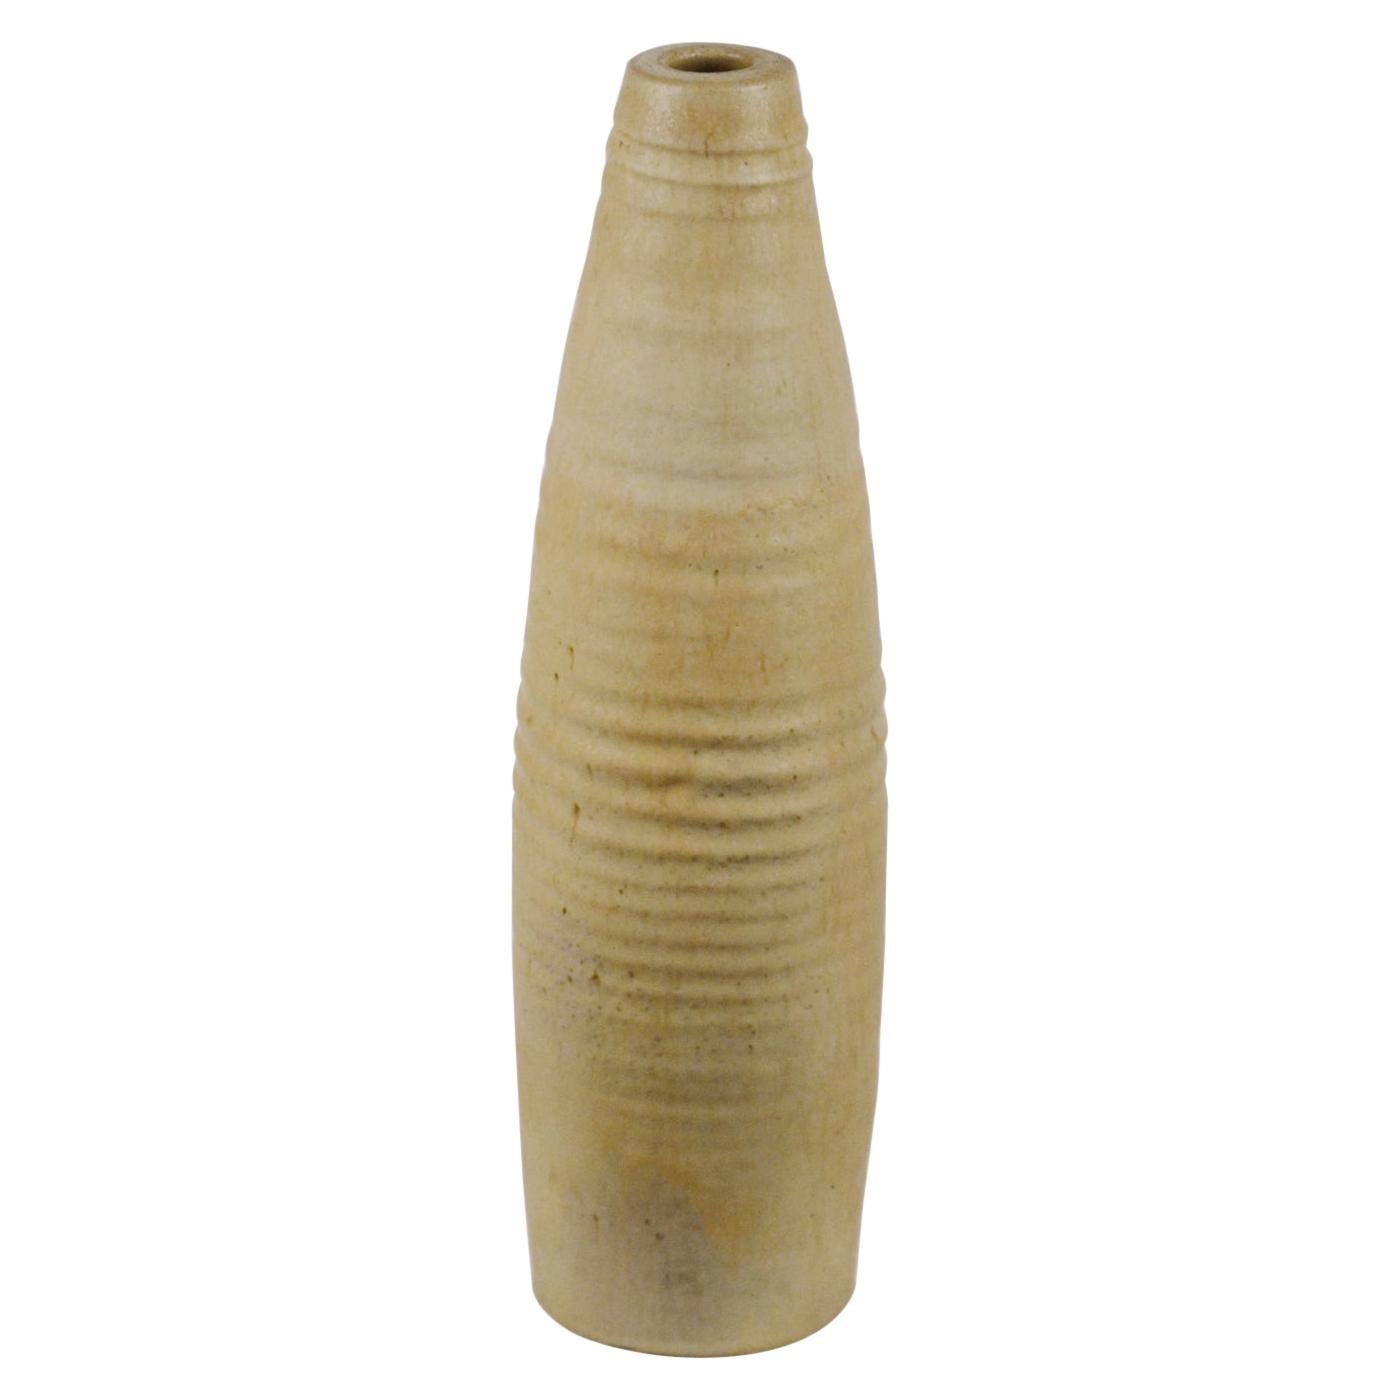 Hand turned studio pottery (floor) tall vase in elongated form has a natural finish. This all sculptural studio pottery vase created on the turning wheel by highly technical skilled Dutch ceramist in the 1960's. The semi matte glaze and form